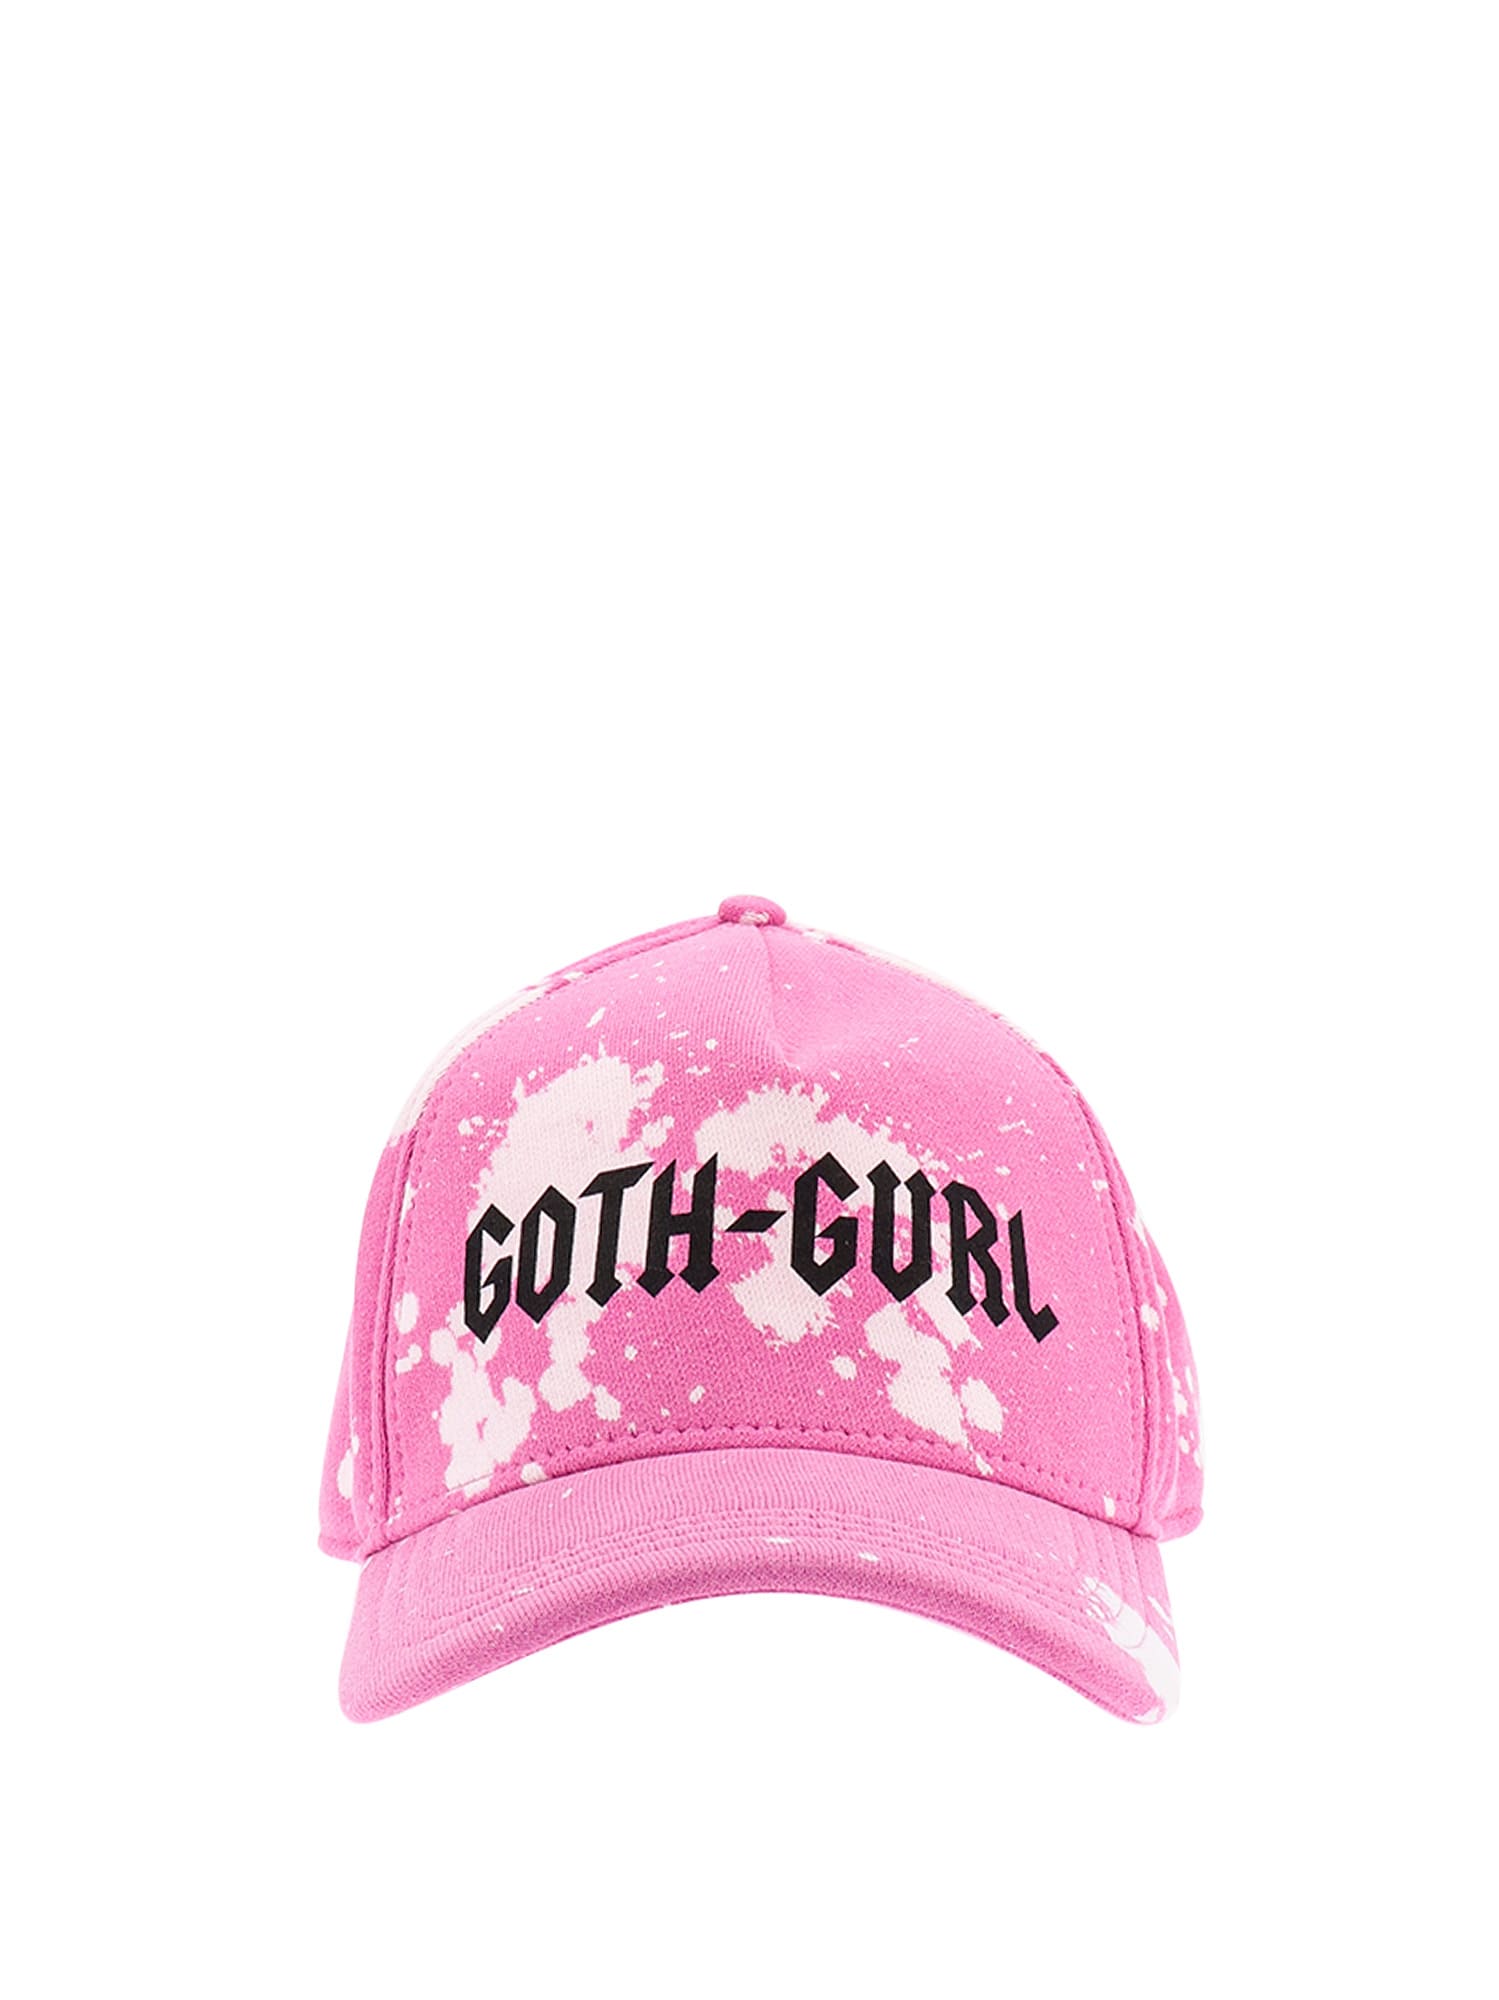 Shop Dsquared2 Hat In Pink